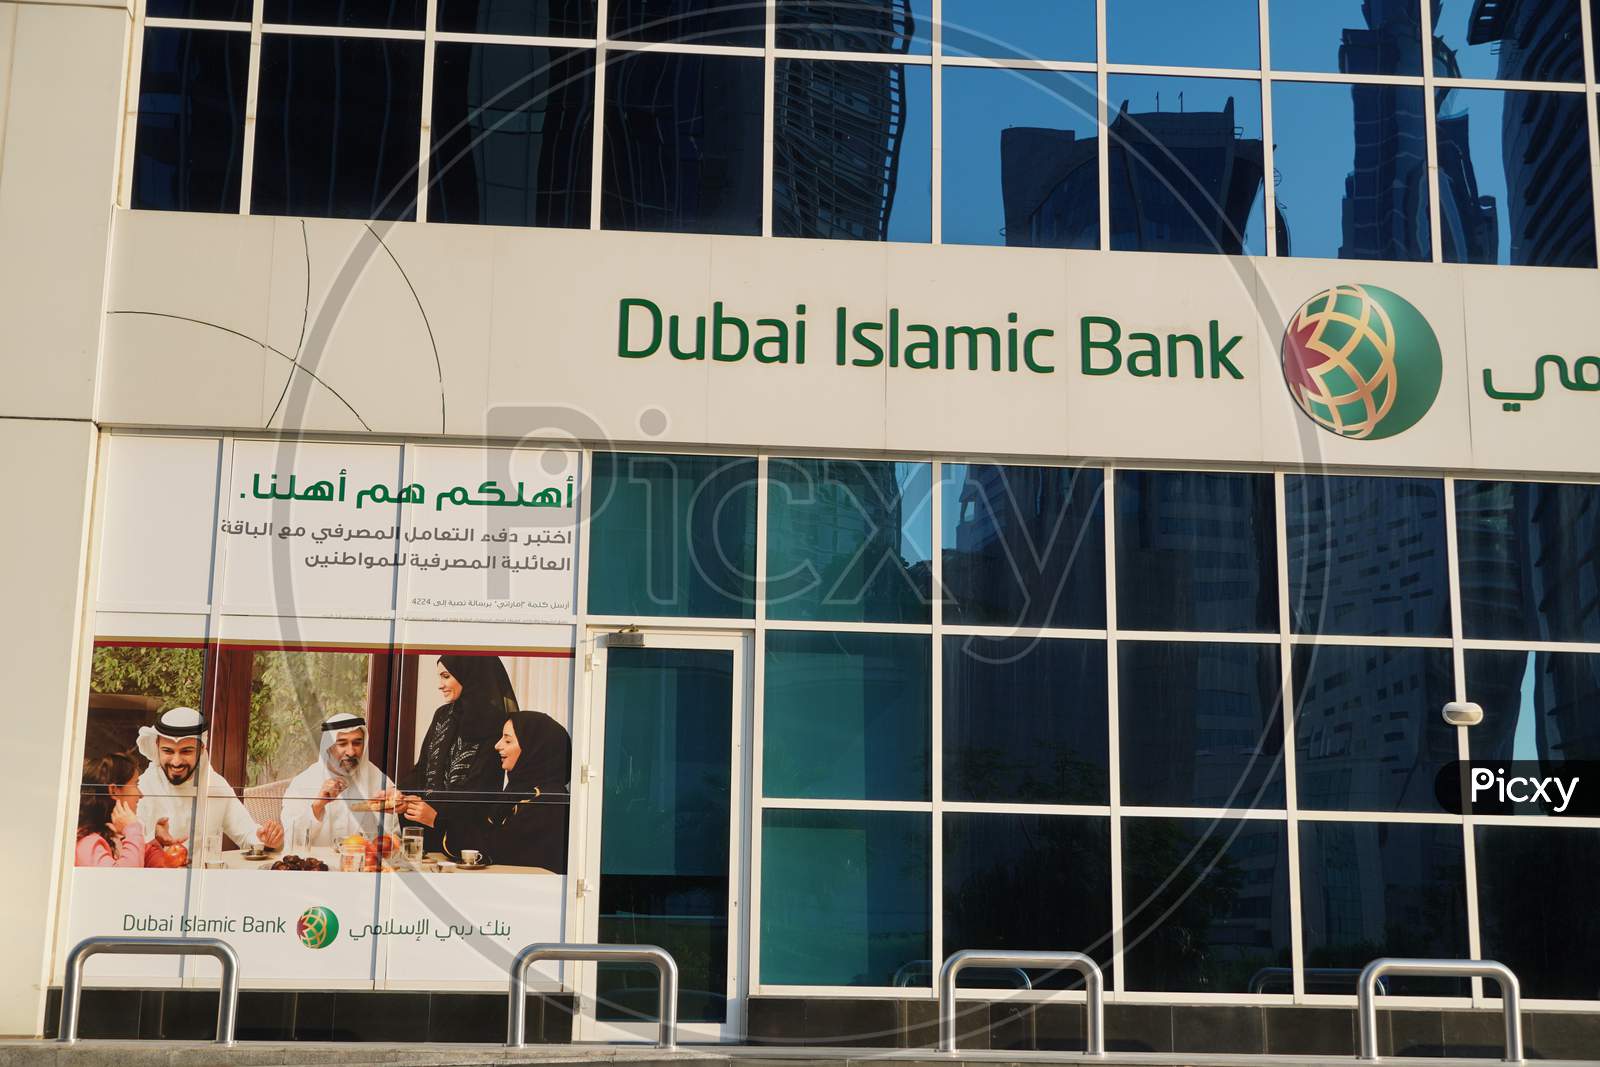 Dubai Uae December 2019 - Dubai Islamic Bank A Major Middle Eastern Banks Building Sign Logo On Large Building Top On A Sunny Day. Bank Branch Store Front.